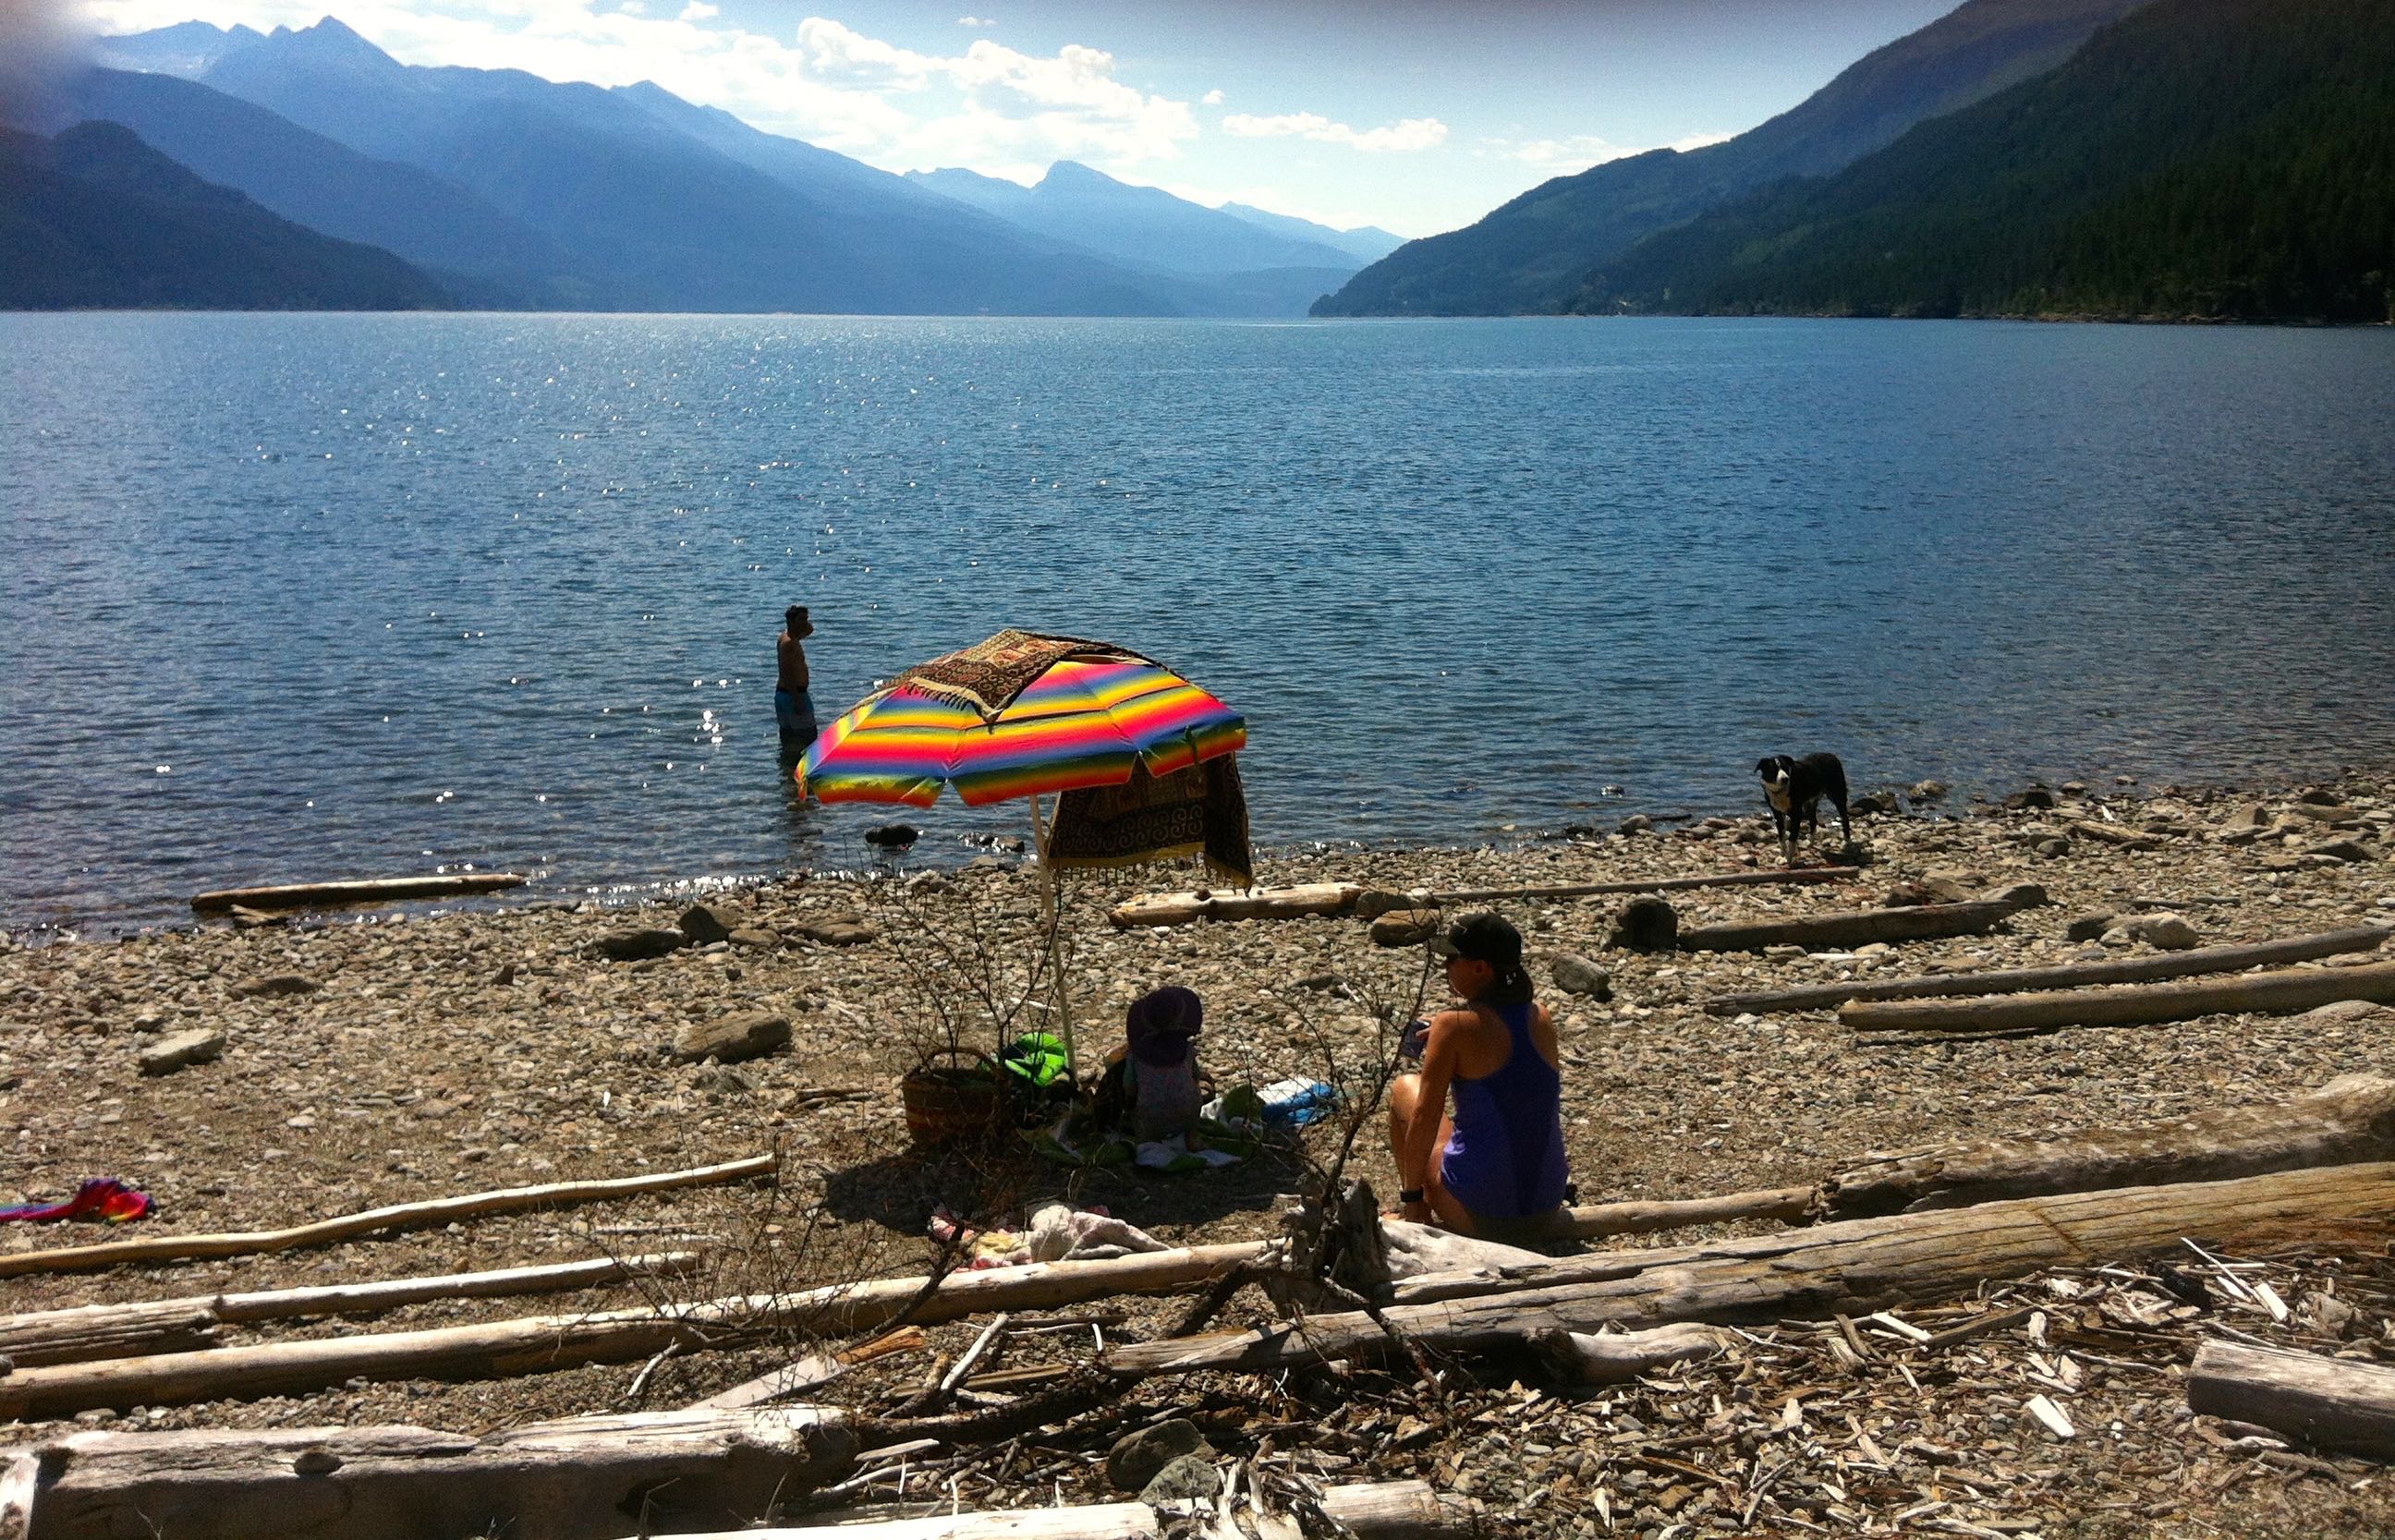 Keep Kootenay Lake pristine - Clean Drain Dry All your watercraft and equipment!